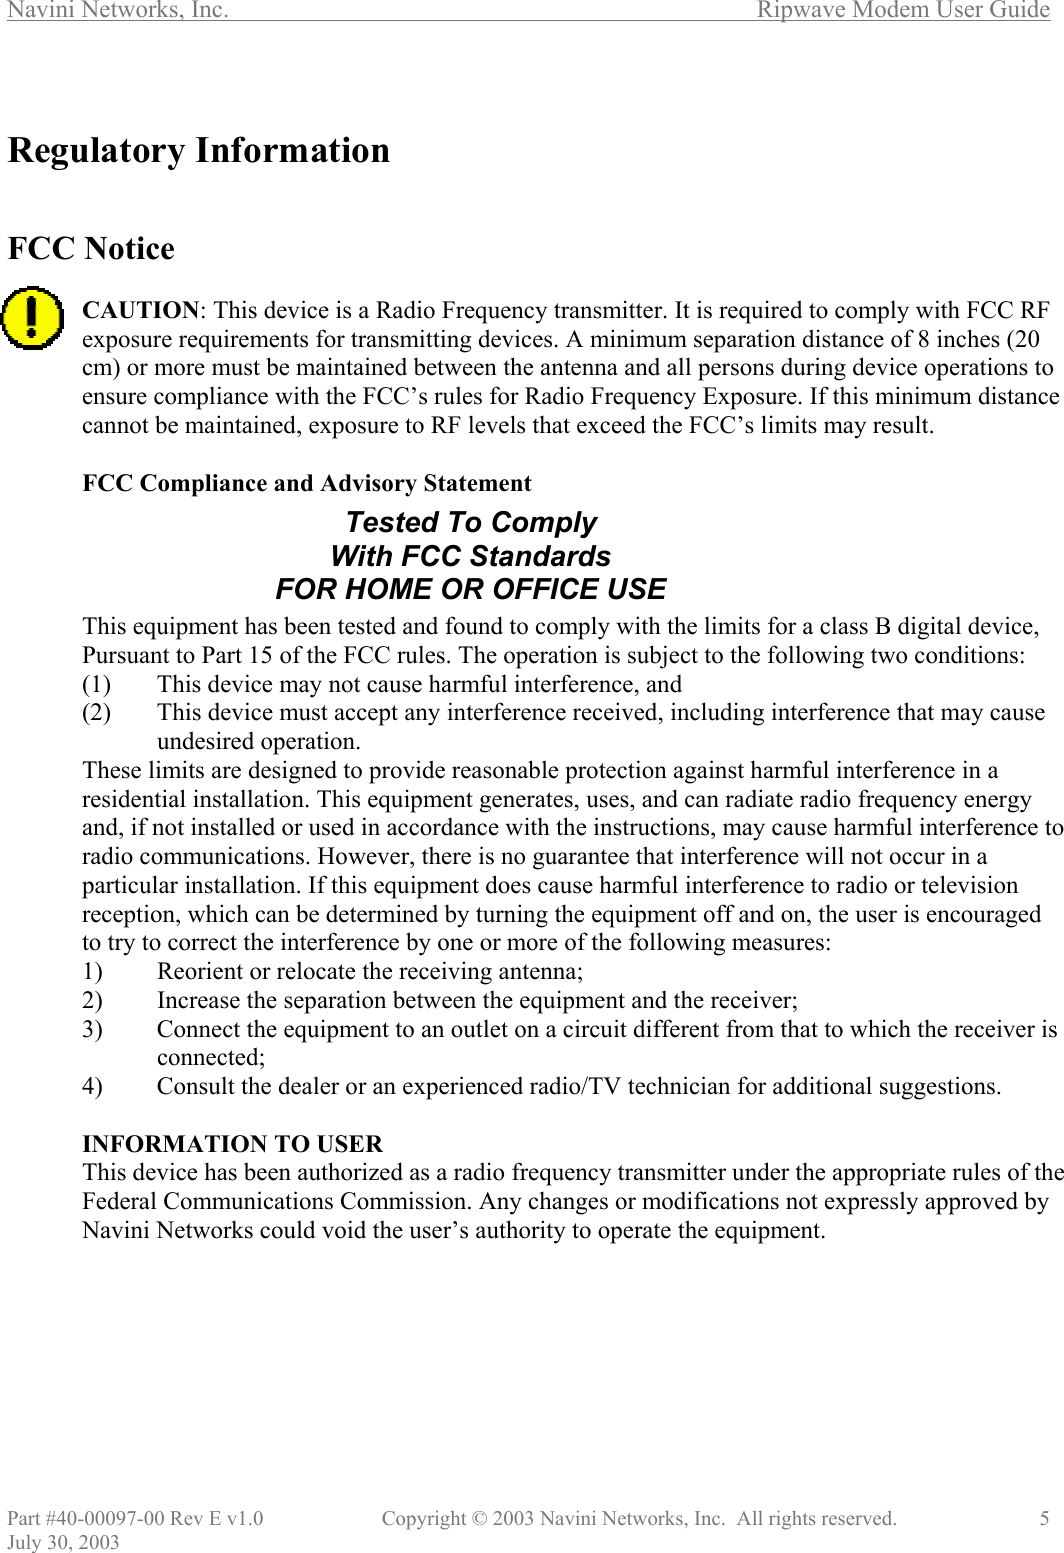 Navini Networks, Inc.        Ripwave Modem User Guide Part #40-00097-00 Rev E v1.0    Copyright © 2003 Navini Networks, Inc.  All rights reserved.               5 July 30, 2003  Regulatory Information   FCC Notice  CAUTION: This device is a Radio Frequency transmitter. It is required to comply with FCC RF exposure requirements for transmitting devices. A minimum separation distance of 8 inches (20 cm) or more must be maintained between the antenna and all persons during device operations to ensure compliance with the FCC’s rules for Radio Frequency Exposure. If this minimum distance cannot be maintained, exposure to RF levels that exceed the FCC’s limits may result.   FCC Compliance and Advisory Statement       This equipment has been tested and found to comply with the limits for a class B digital device, Pursuant to Part 15 of the FCC rules. The operation is subject to the following two conditions: (1)  This device may not cause harmful interference, and (2)  This device must accept any interference received, including interference that may cause undesired operation. These limits are designed to provide reasonable protection against harmful interference in a residential installation. This equipment generates, uses, and can radiate radio frequency energy and, if not installed or used in accordance with the instructions, may cause harmful interference to radio communications. However, there is no guarantee that interference will not occur in a particular installation. If this equipment does cause harmful interference to radio or television reception, which can be determined by turning the equipment off and on, the user is encouraged to try to correct the interference by one or more of the following measures: 1)  Reorient or relocate the receiving antenna; 2)  Increase the separation between the equipment and the receiver; 3)  Connect the equipment to an outlet on a circuit different from that to which the receiver is connected; 4)  Consult the dealer or an experienced radio/TV technician for additional suggestions.  INFORMATION TO USER This device has been authorized as a radio frequency transmitter under the appropriate rules of the Federal Communications Commission. Any changes or modifications not expressly approved by Navini Networks could void the user’s authority to operate the equipment. Tested To Comply With FCC Standards FOR HOME OR OFFICE USE